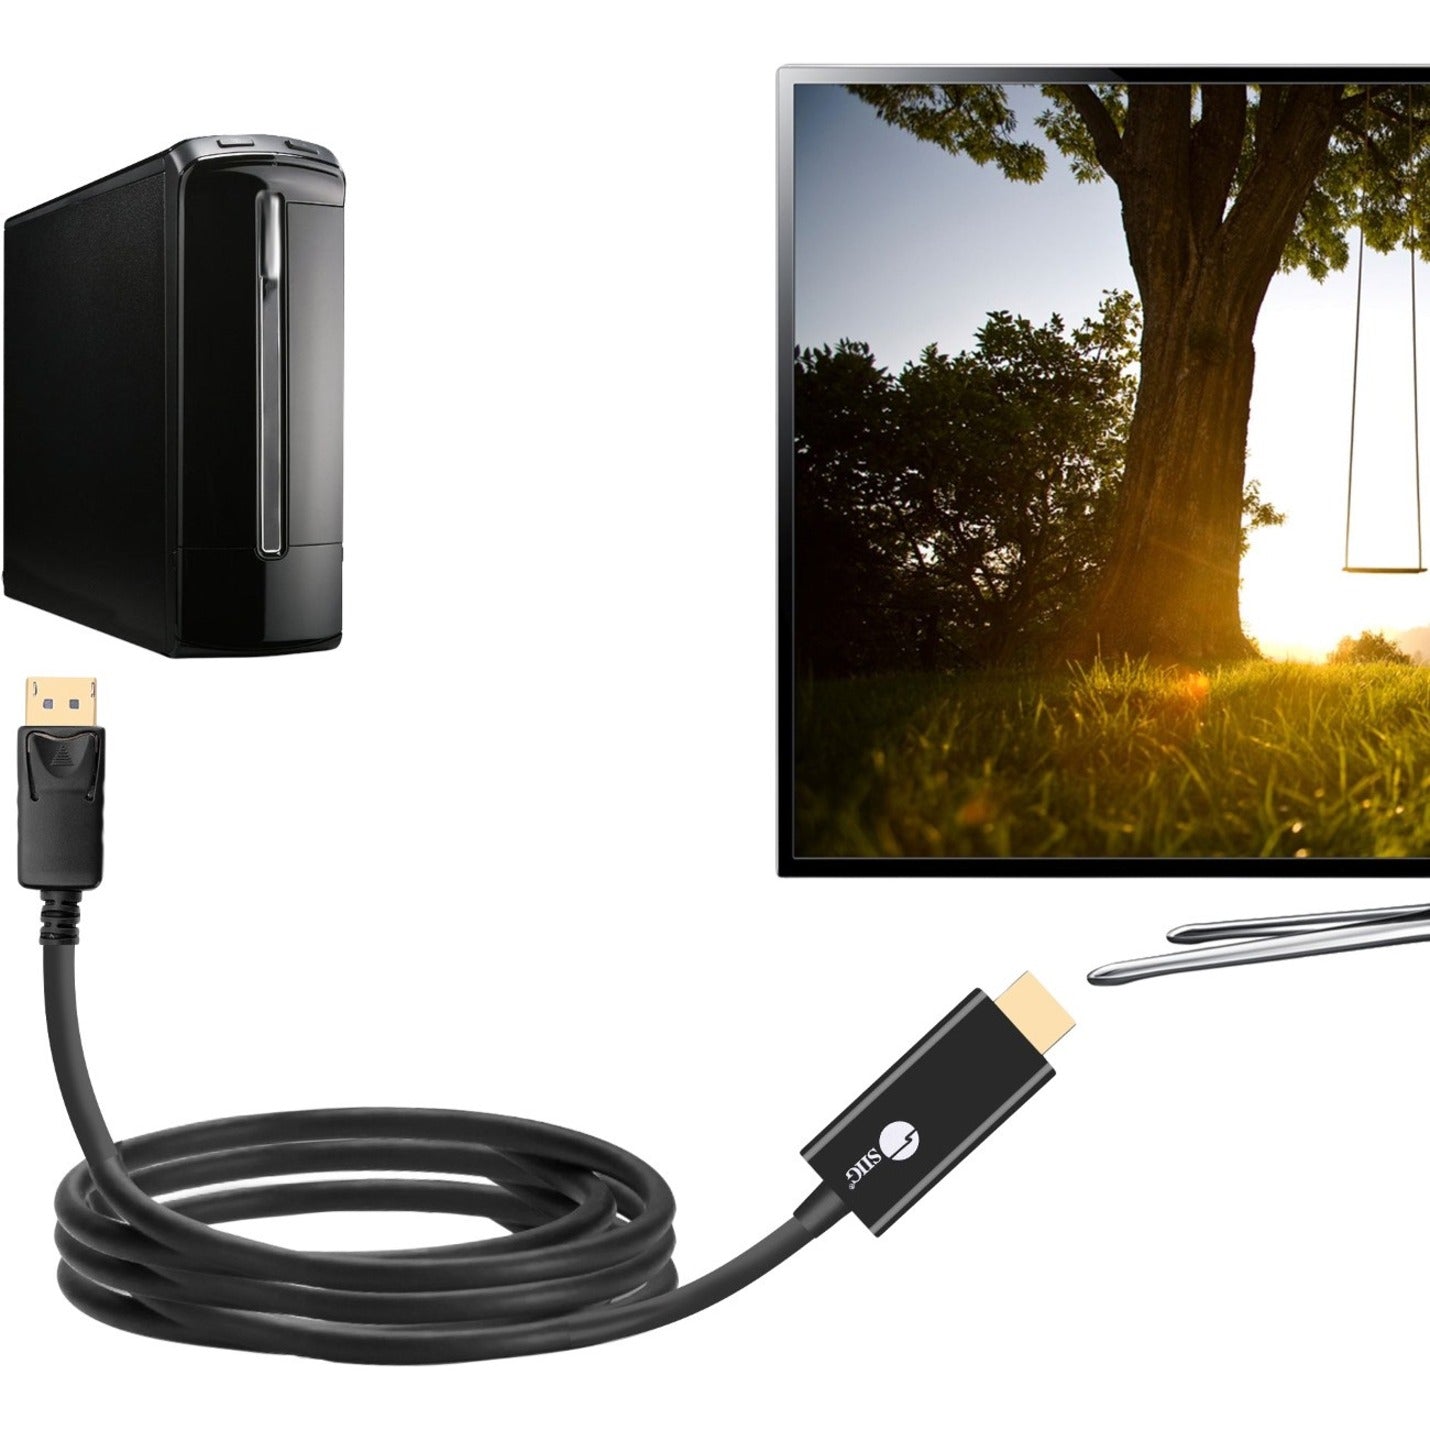 SIIG CB-DP1R12-S1 DisplayPort 1.2 to HDMI 10ft Cable 4K/30Hz, Plug & Play, Gold-Plated Connectors, 2-Year Warranty